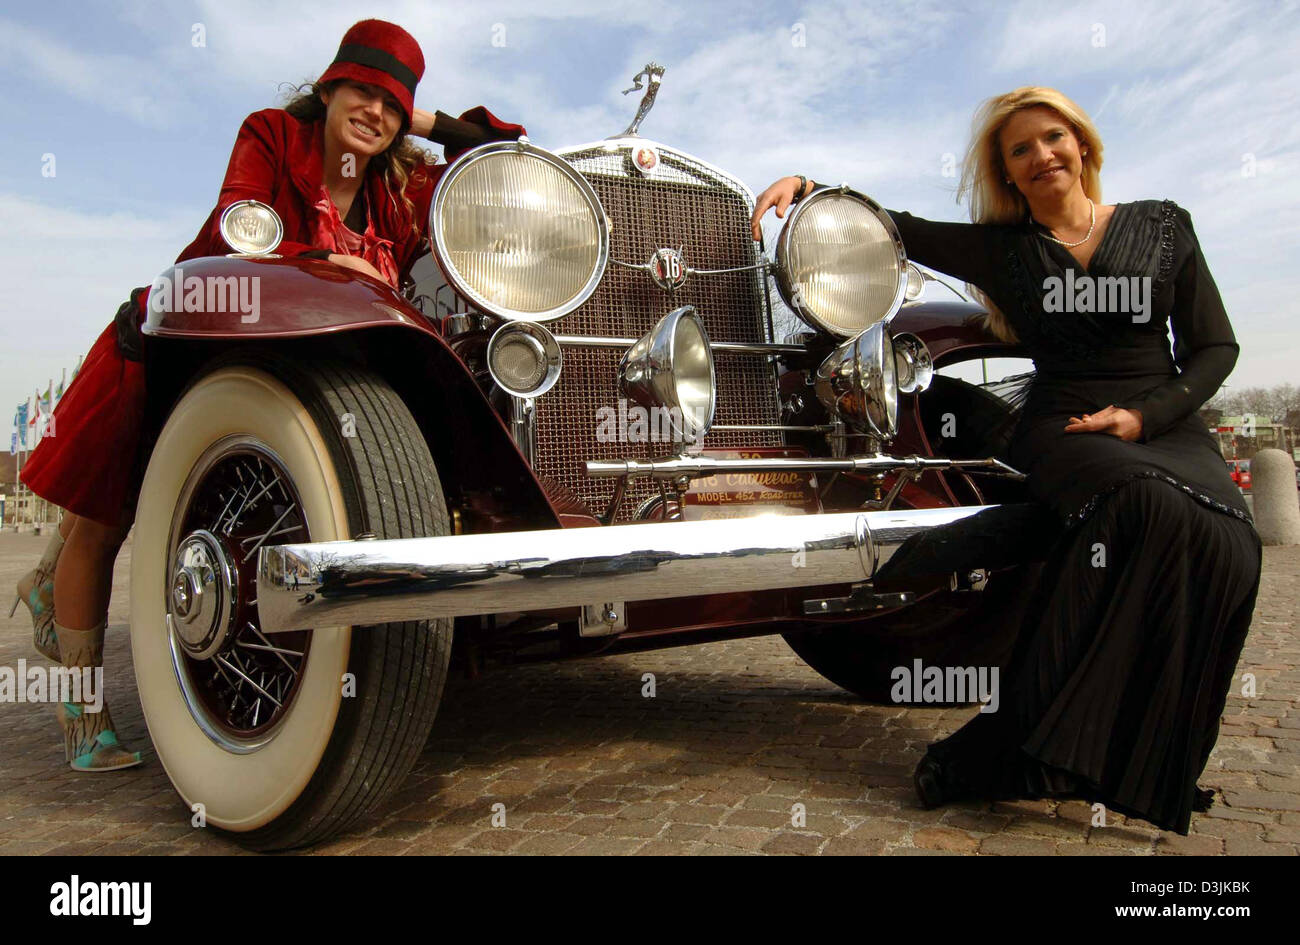 (dpa) - Two models, dressed in clothes of the 1930s, pose on a Cadillac Fleetwood vintage car from 1930 in Essen, Germany, 22 March 2005. The car was  once owned by the legendary Howard Hughes. The Cadillac is valued at an estimated 1,15 million euros. Vintage car fair 'Techno Classica 2005' runs from 07 April to 10 April 2005. More than 1,000 international exhibitors present more  Stock Photo